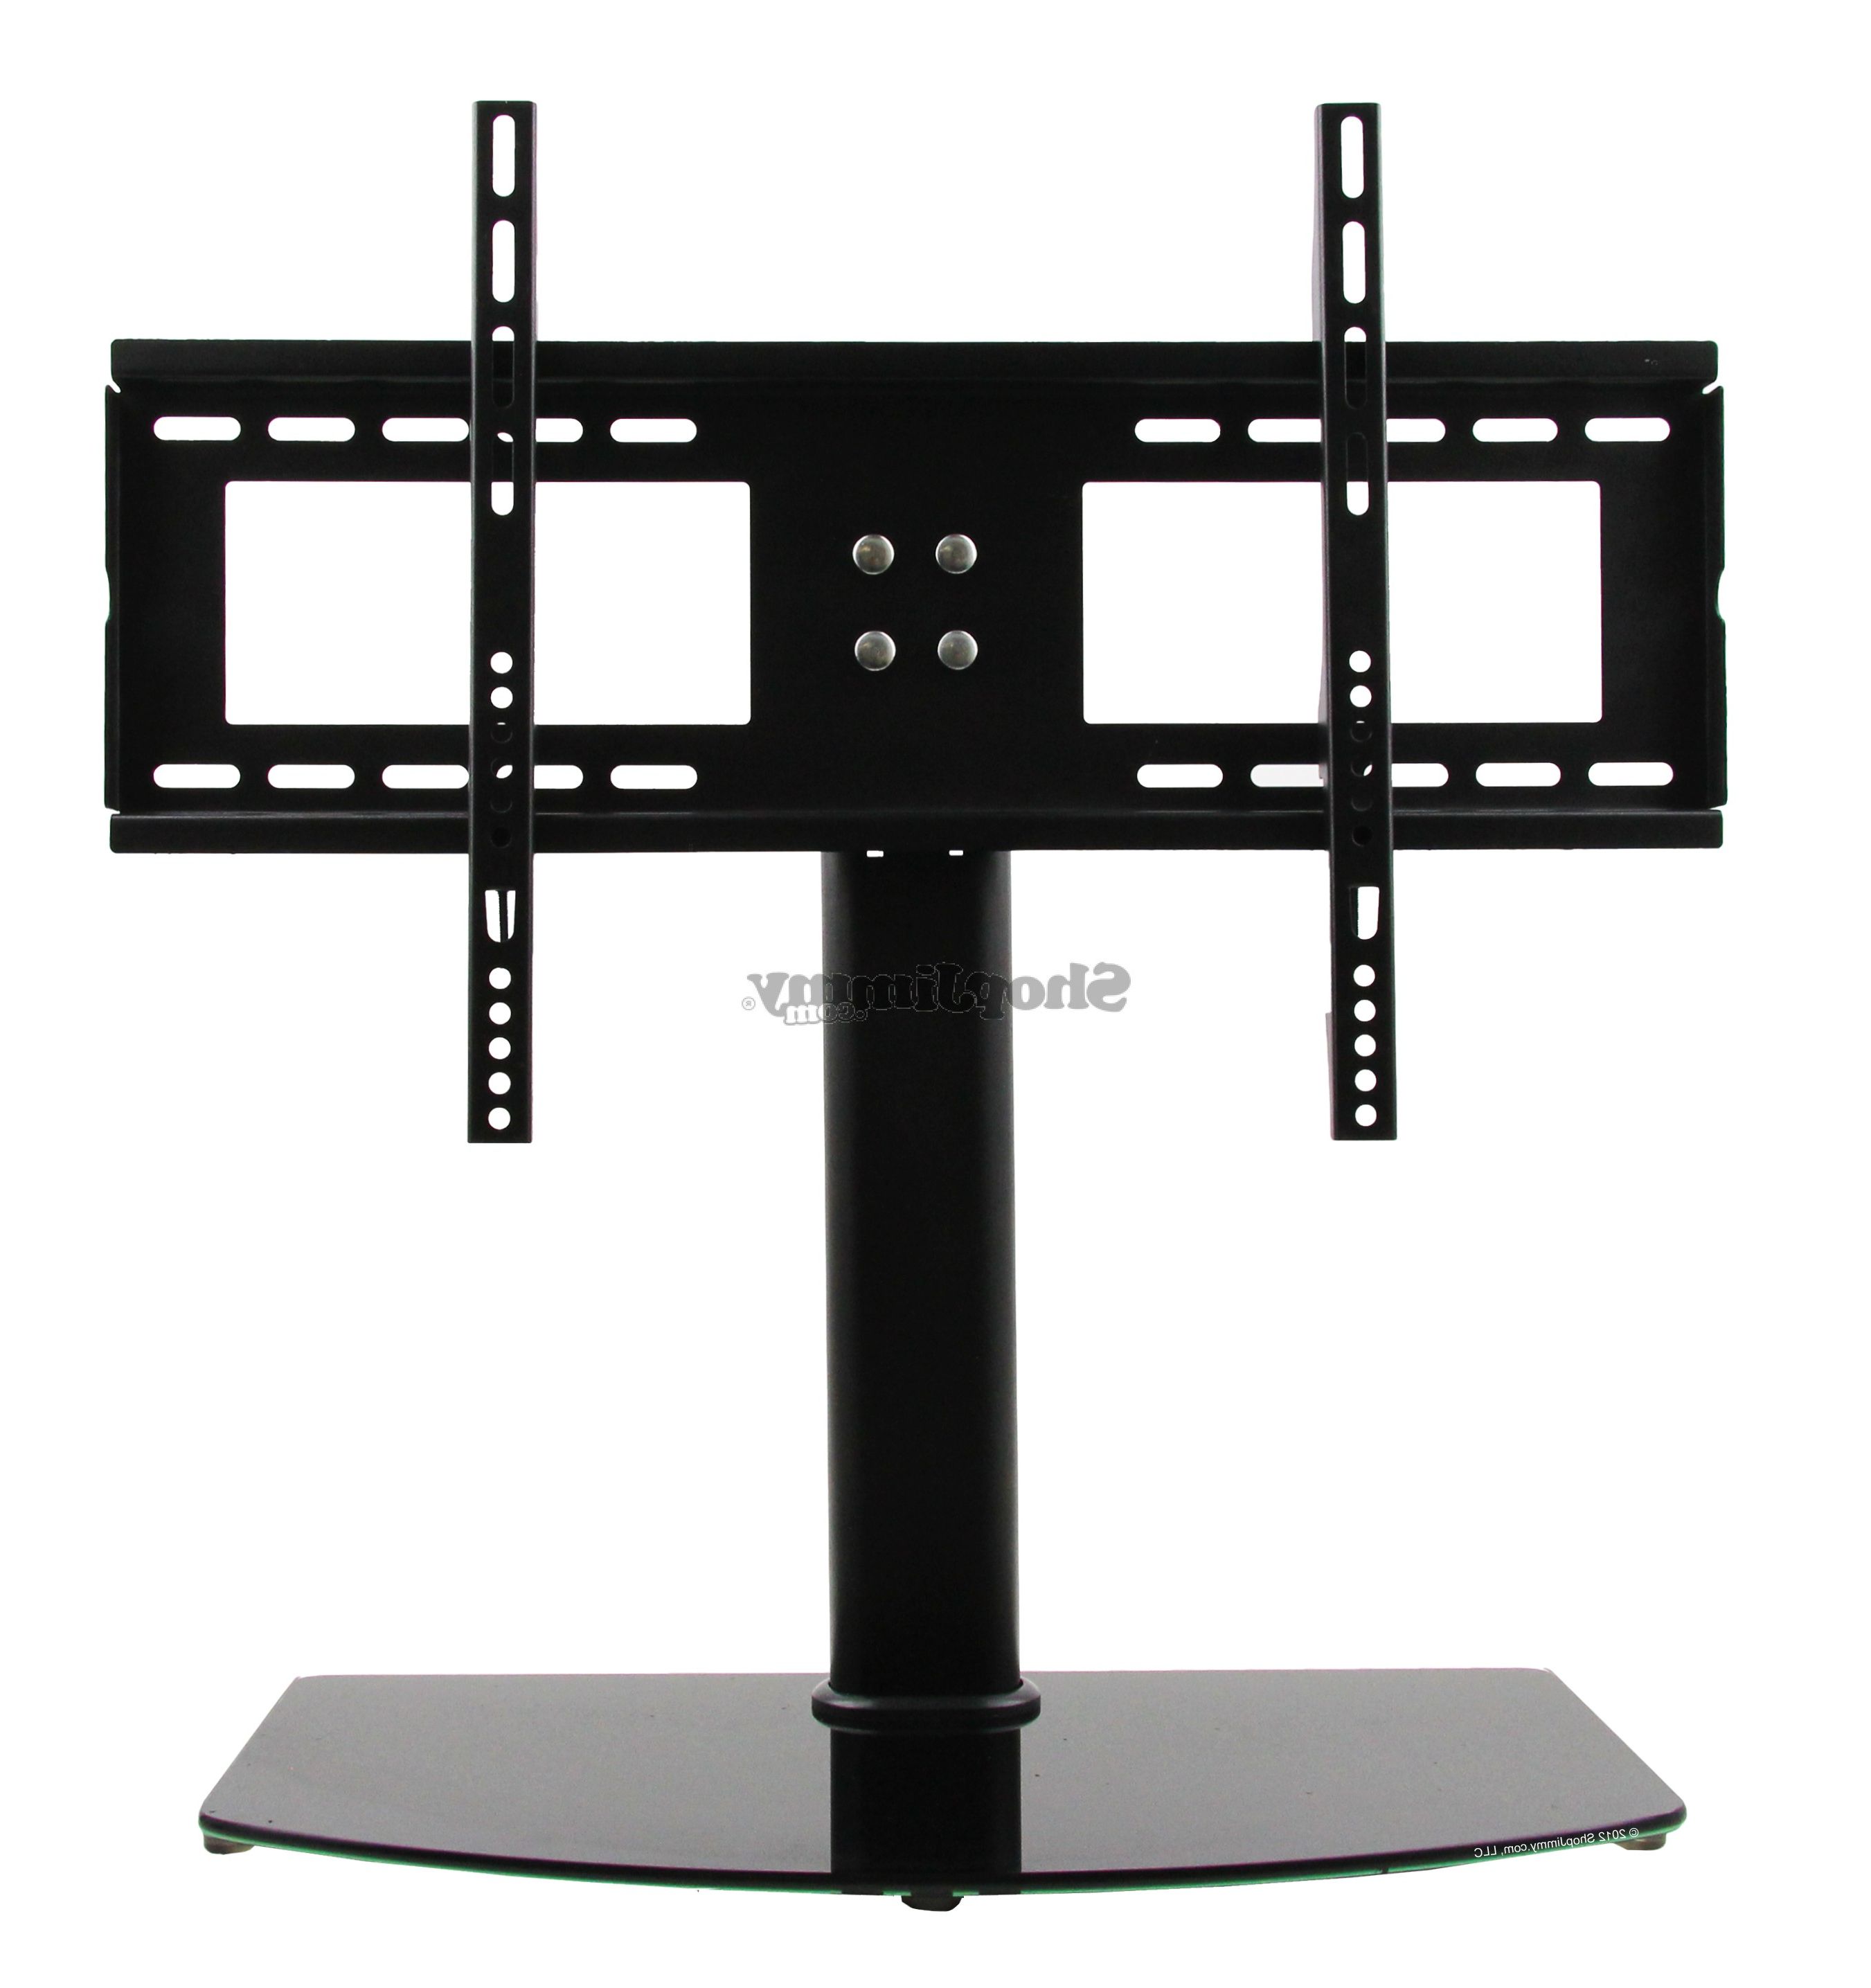 Widely Used Universal Tv Stand/base + Wall Mount For 37" 55" Flat Screen Tvs With Wall Mounted Tv Stands For Flat Screens (View 20 of 20)